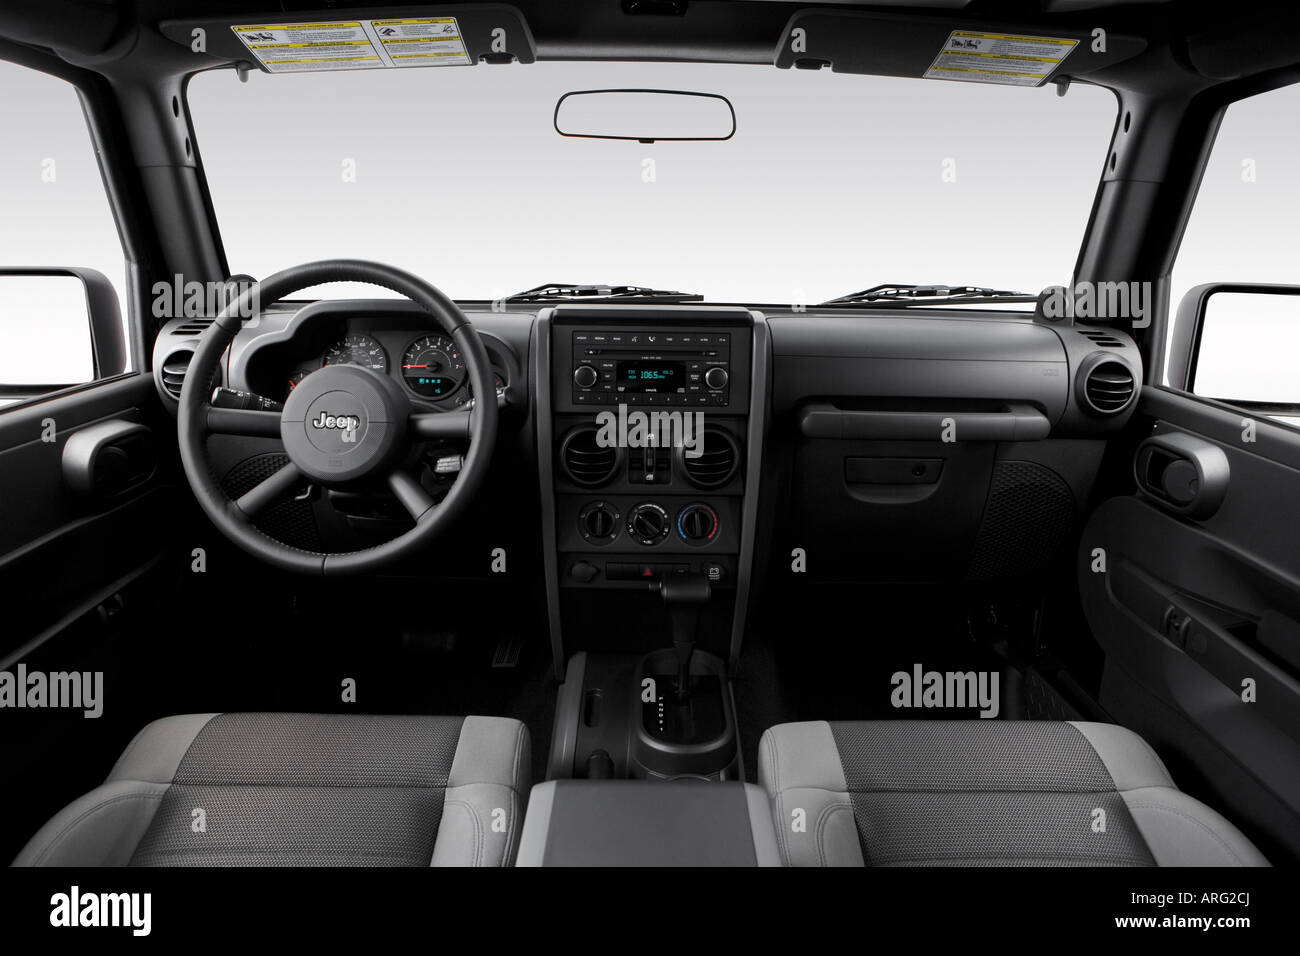 2007 Jeep Wrangler Unlimited X in Black - Dashboard, center console, gear  shifter view Stock Photo - Alamy